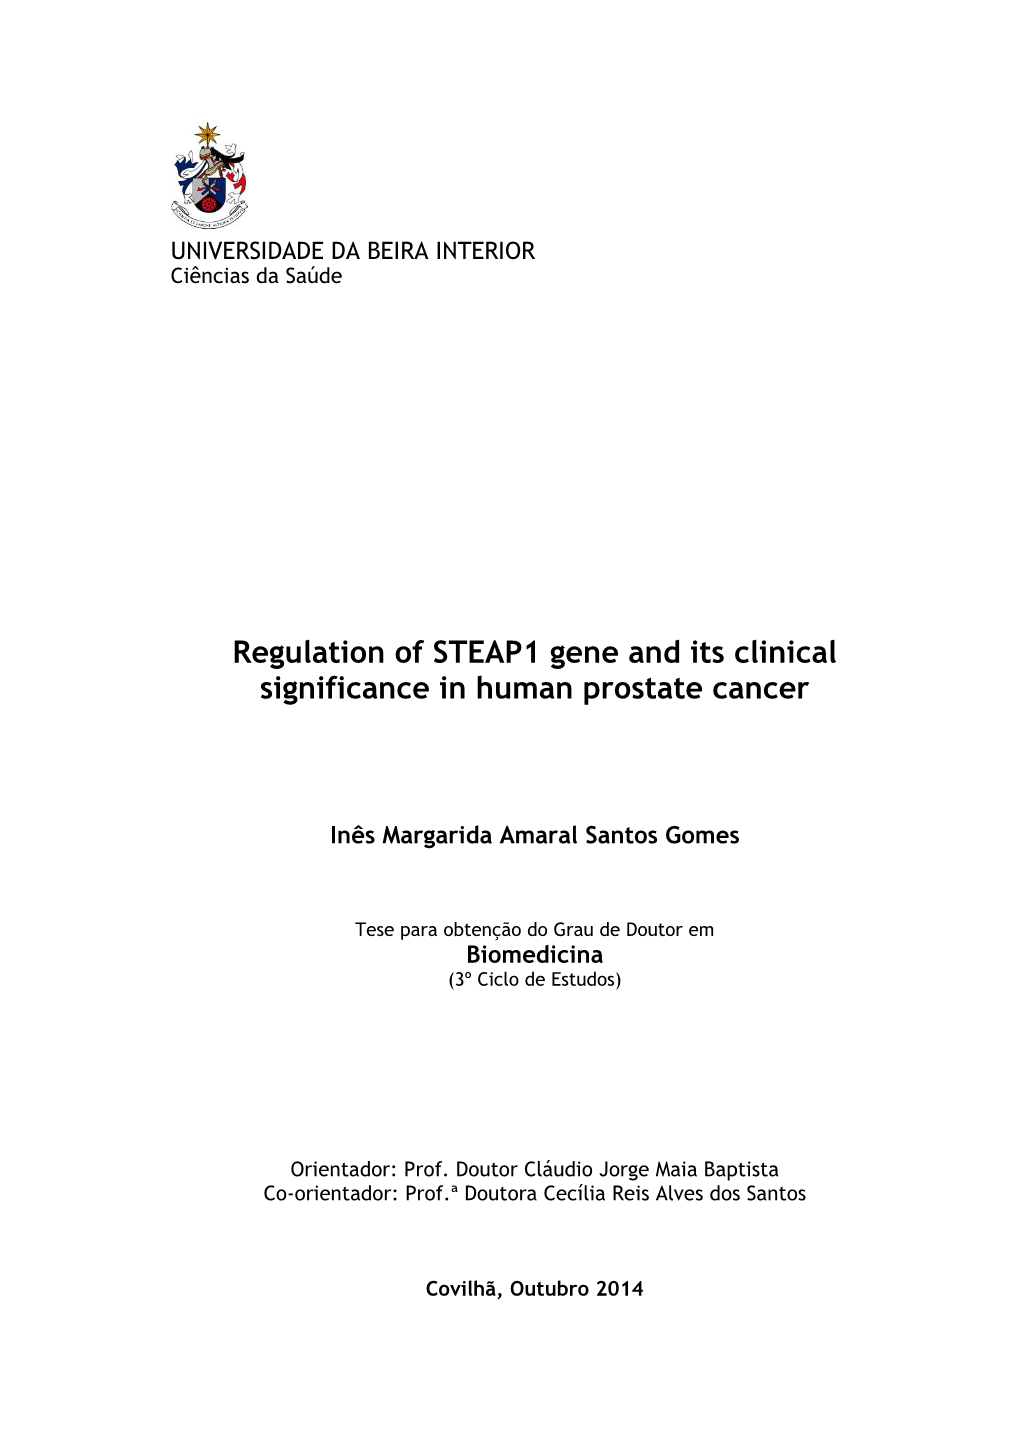 Regulation of STEAP1 Gene and Its Clinical Significance in Human Prostate Cancer